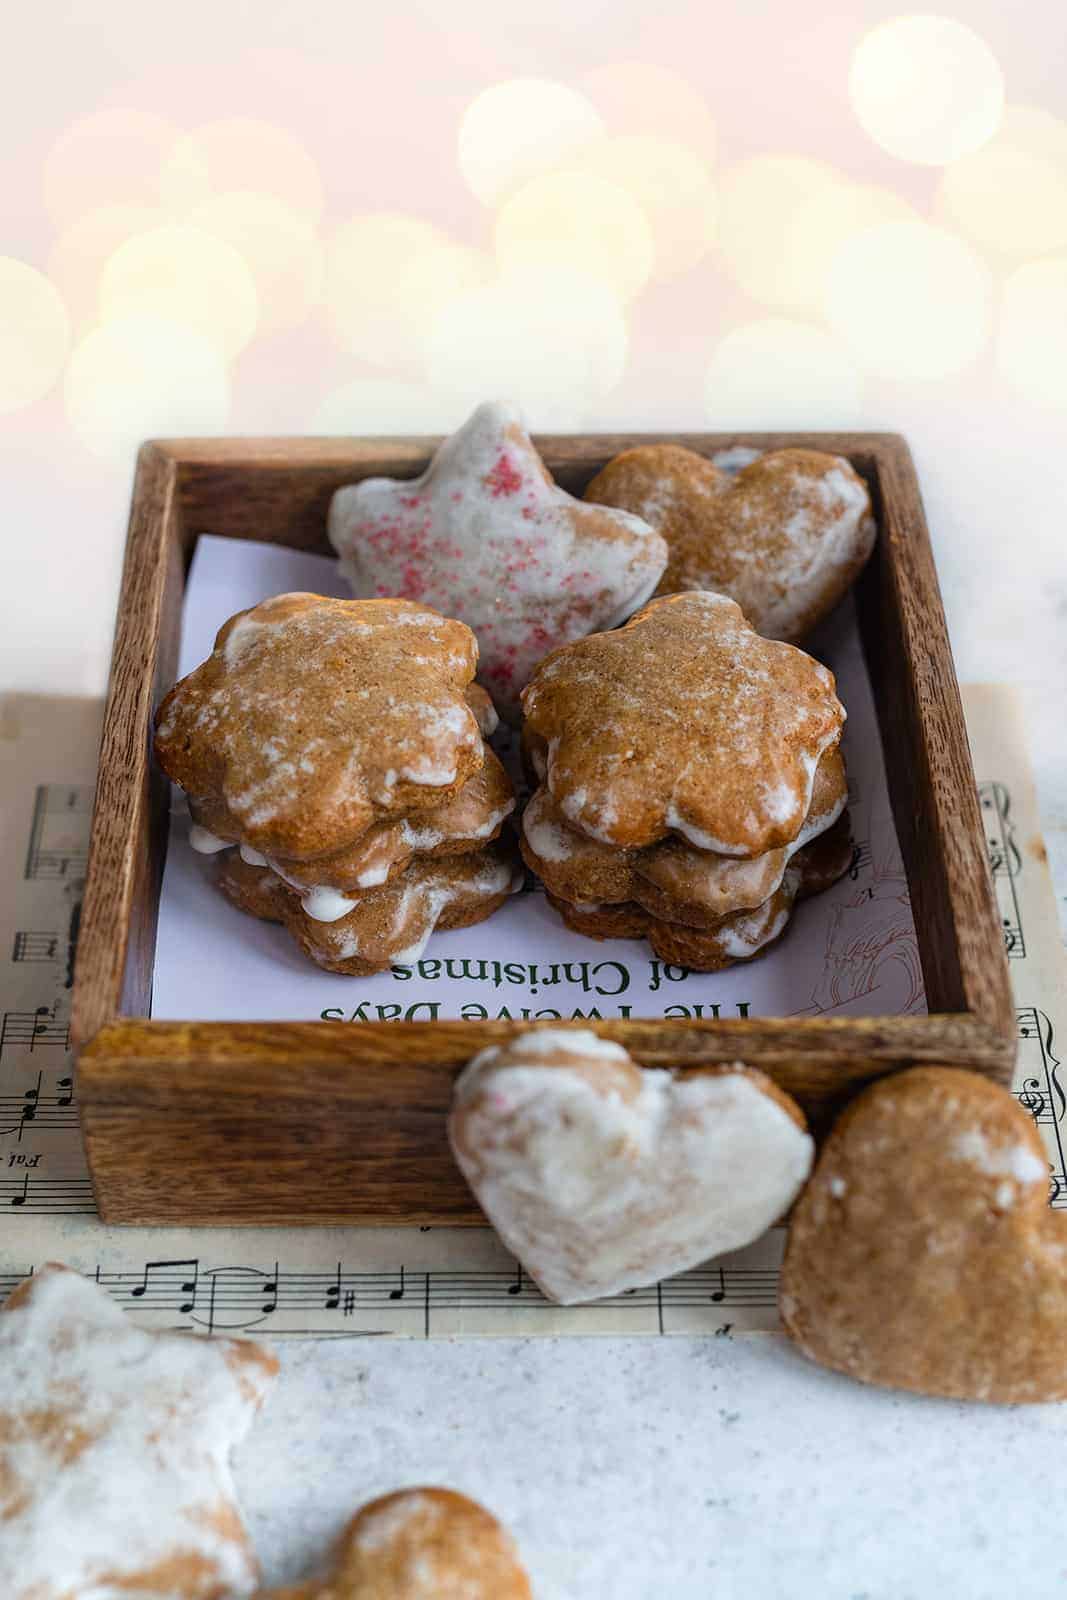 Star and heart shaped ginger cookies (lebkuchen) served in a wooden tray. 